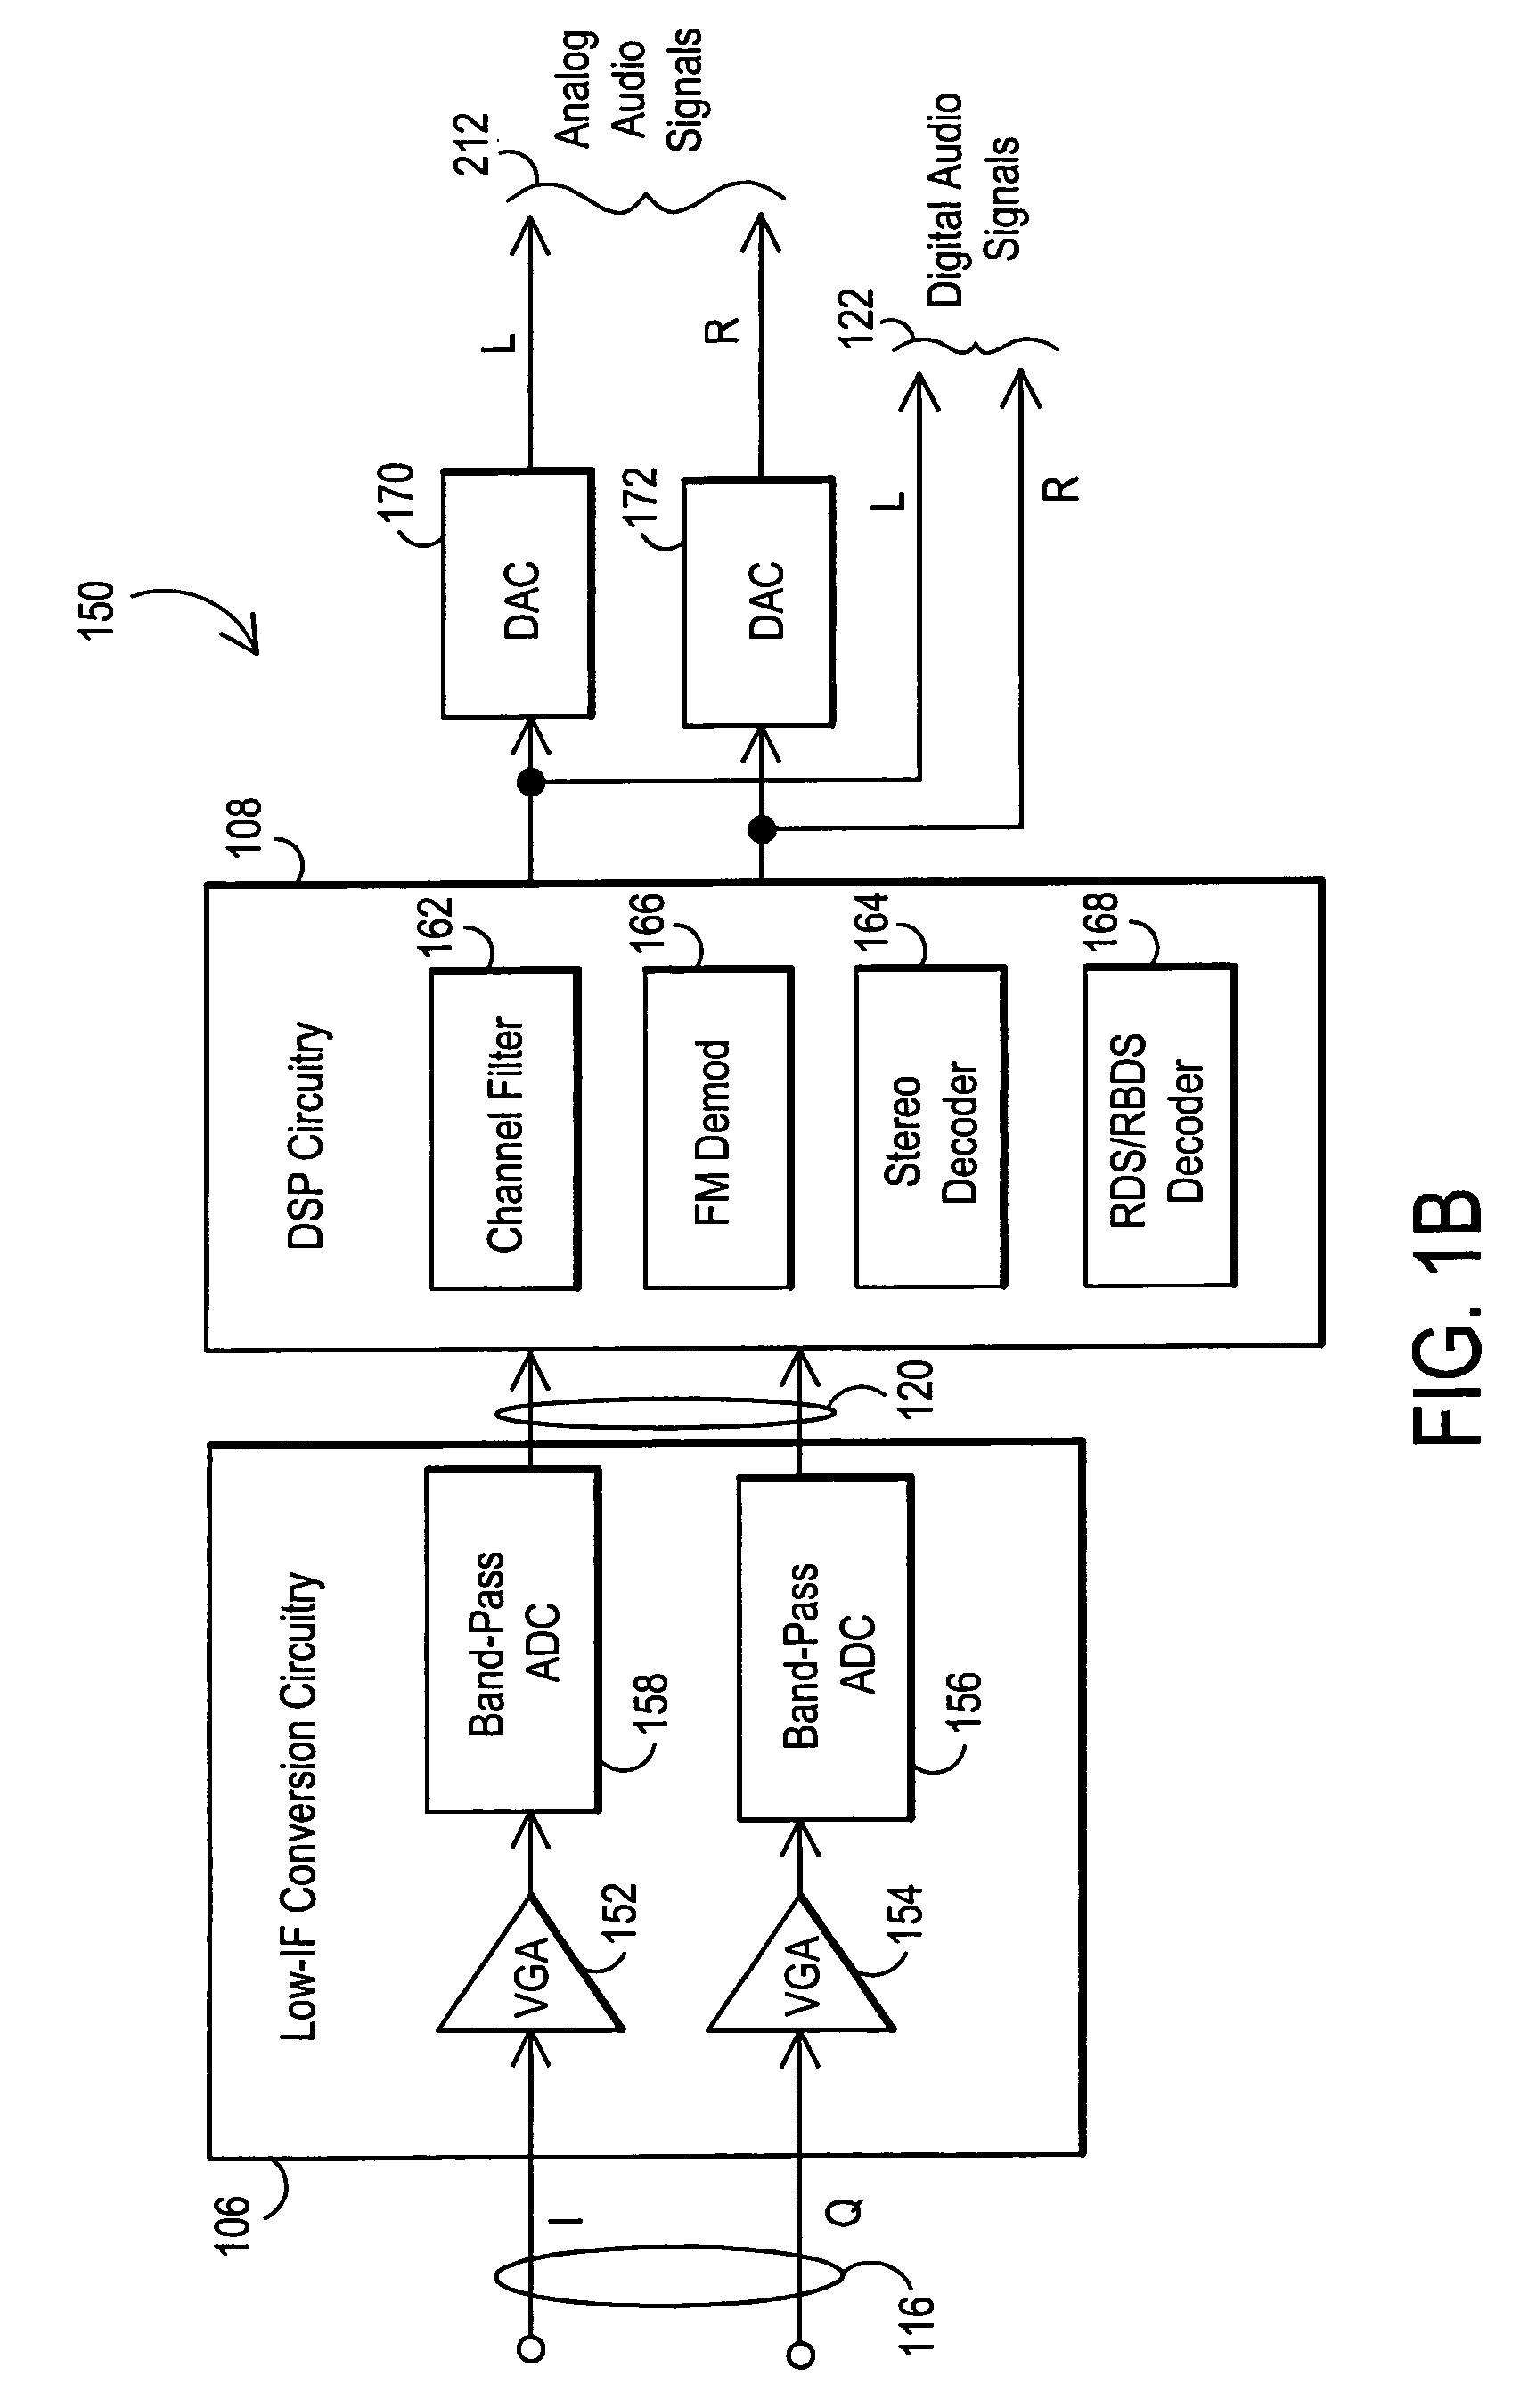 Ratiometric clock systems for integrated receivers and associated methods